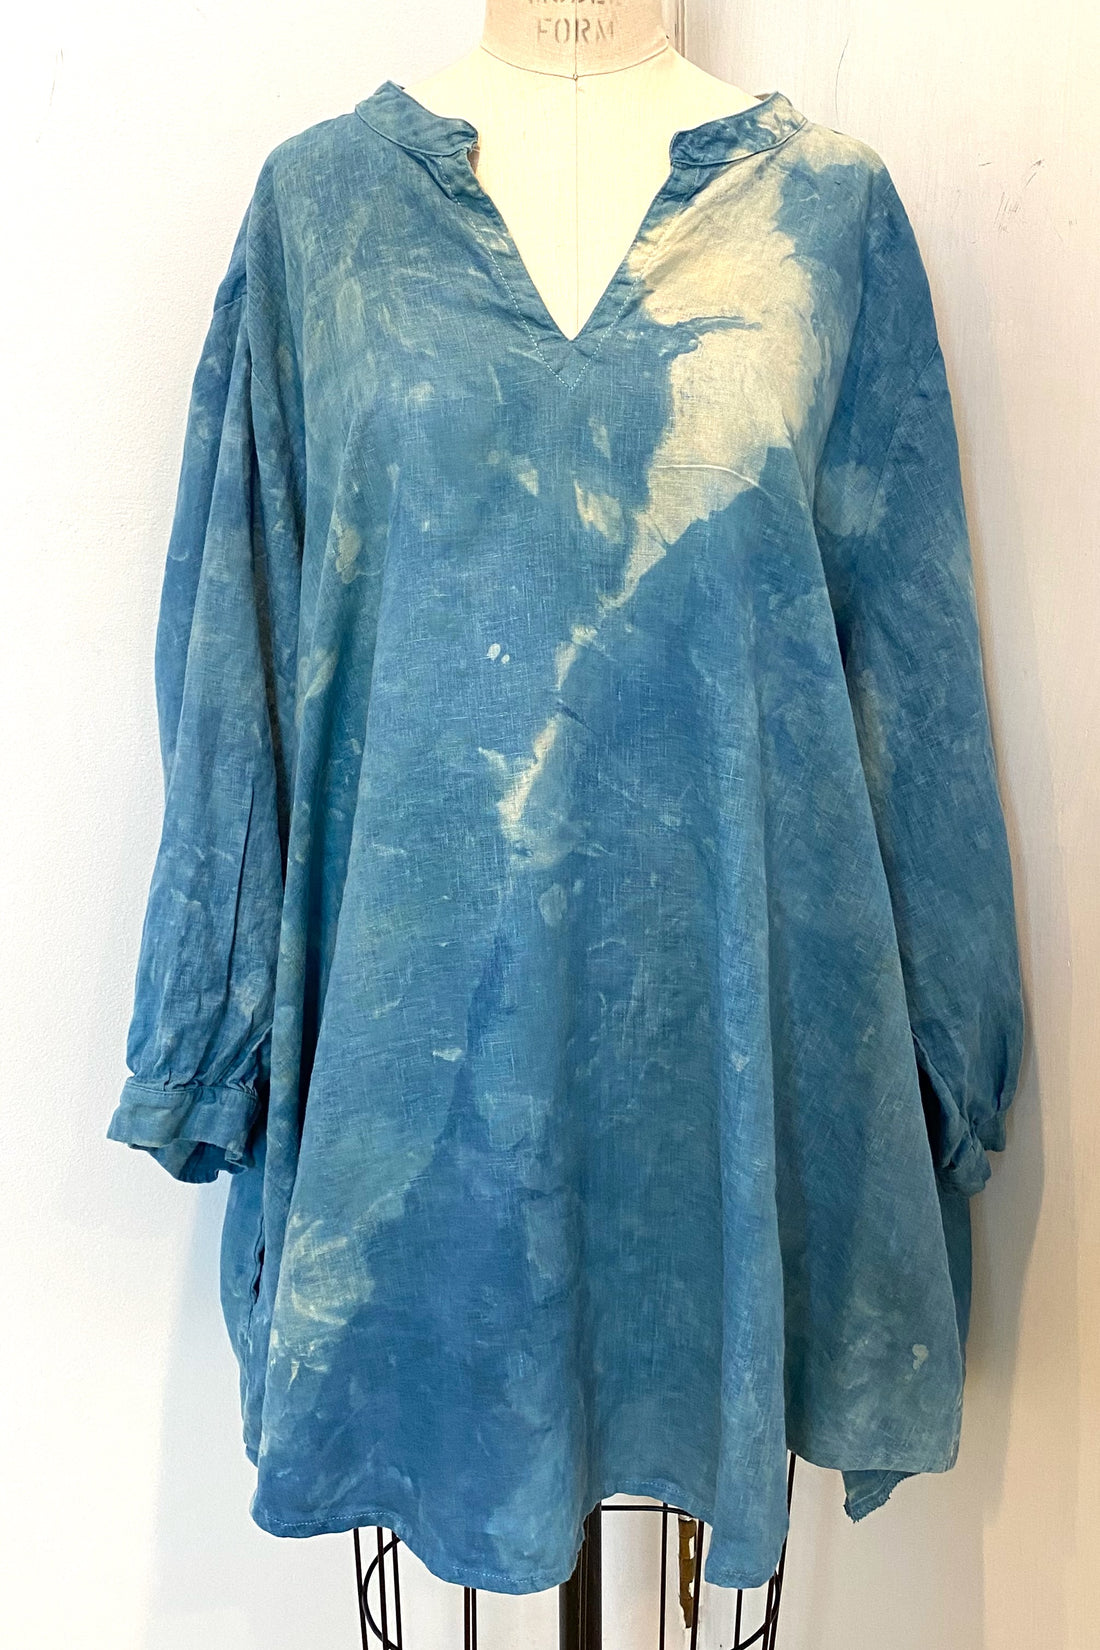 Botanically Dyed Linen Tunic in Teal Size 1